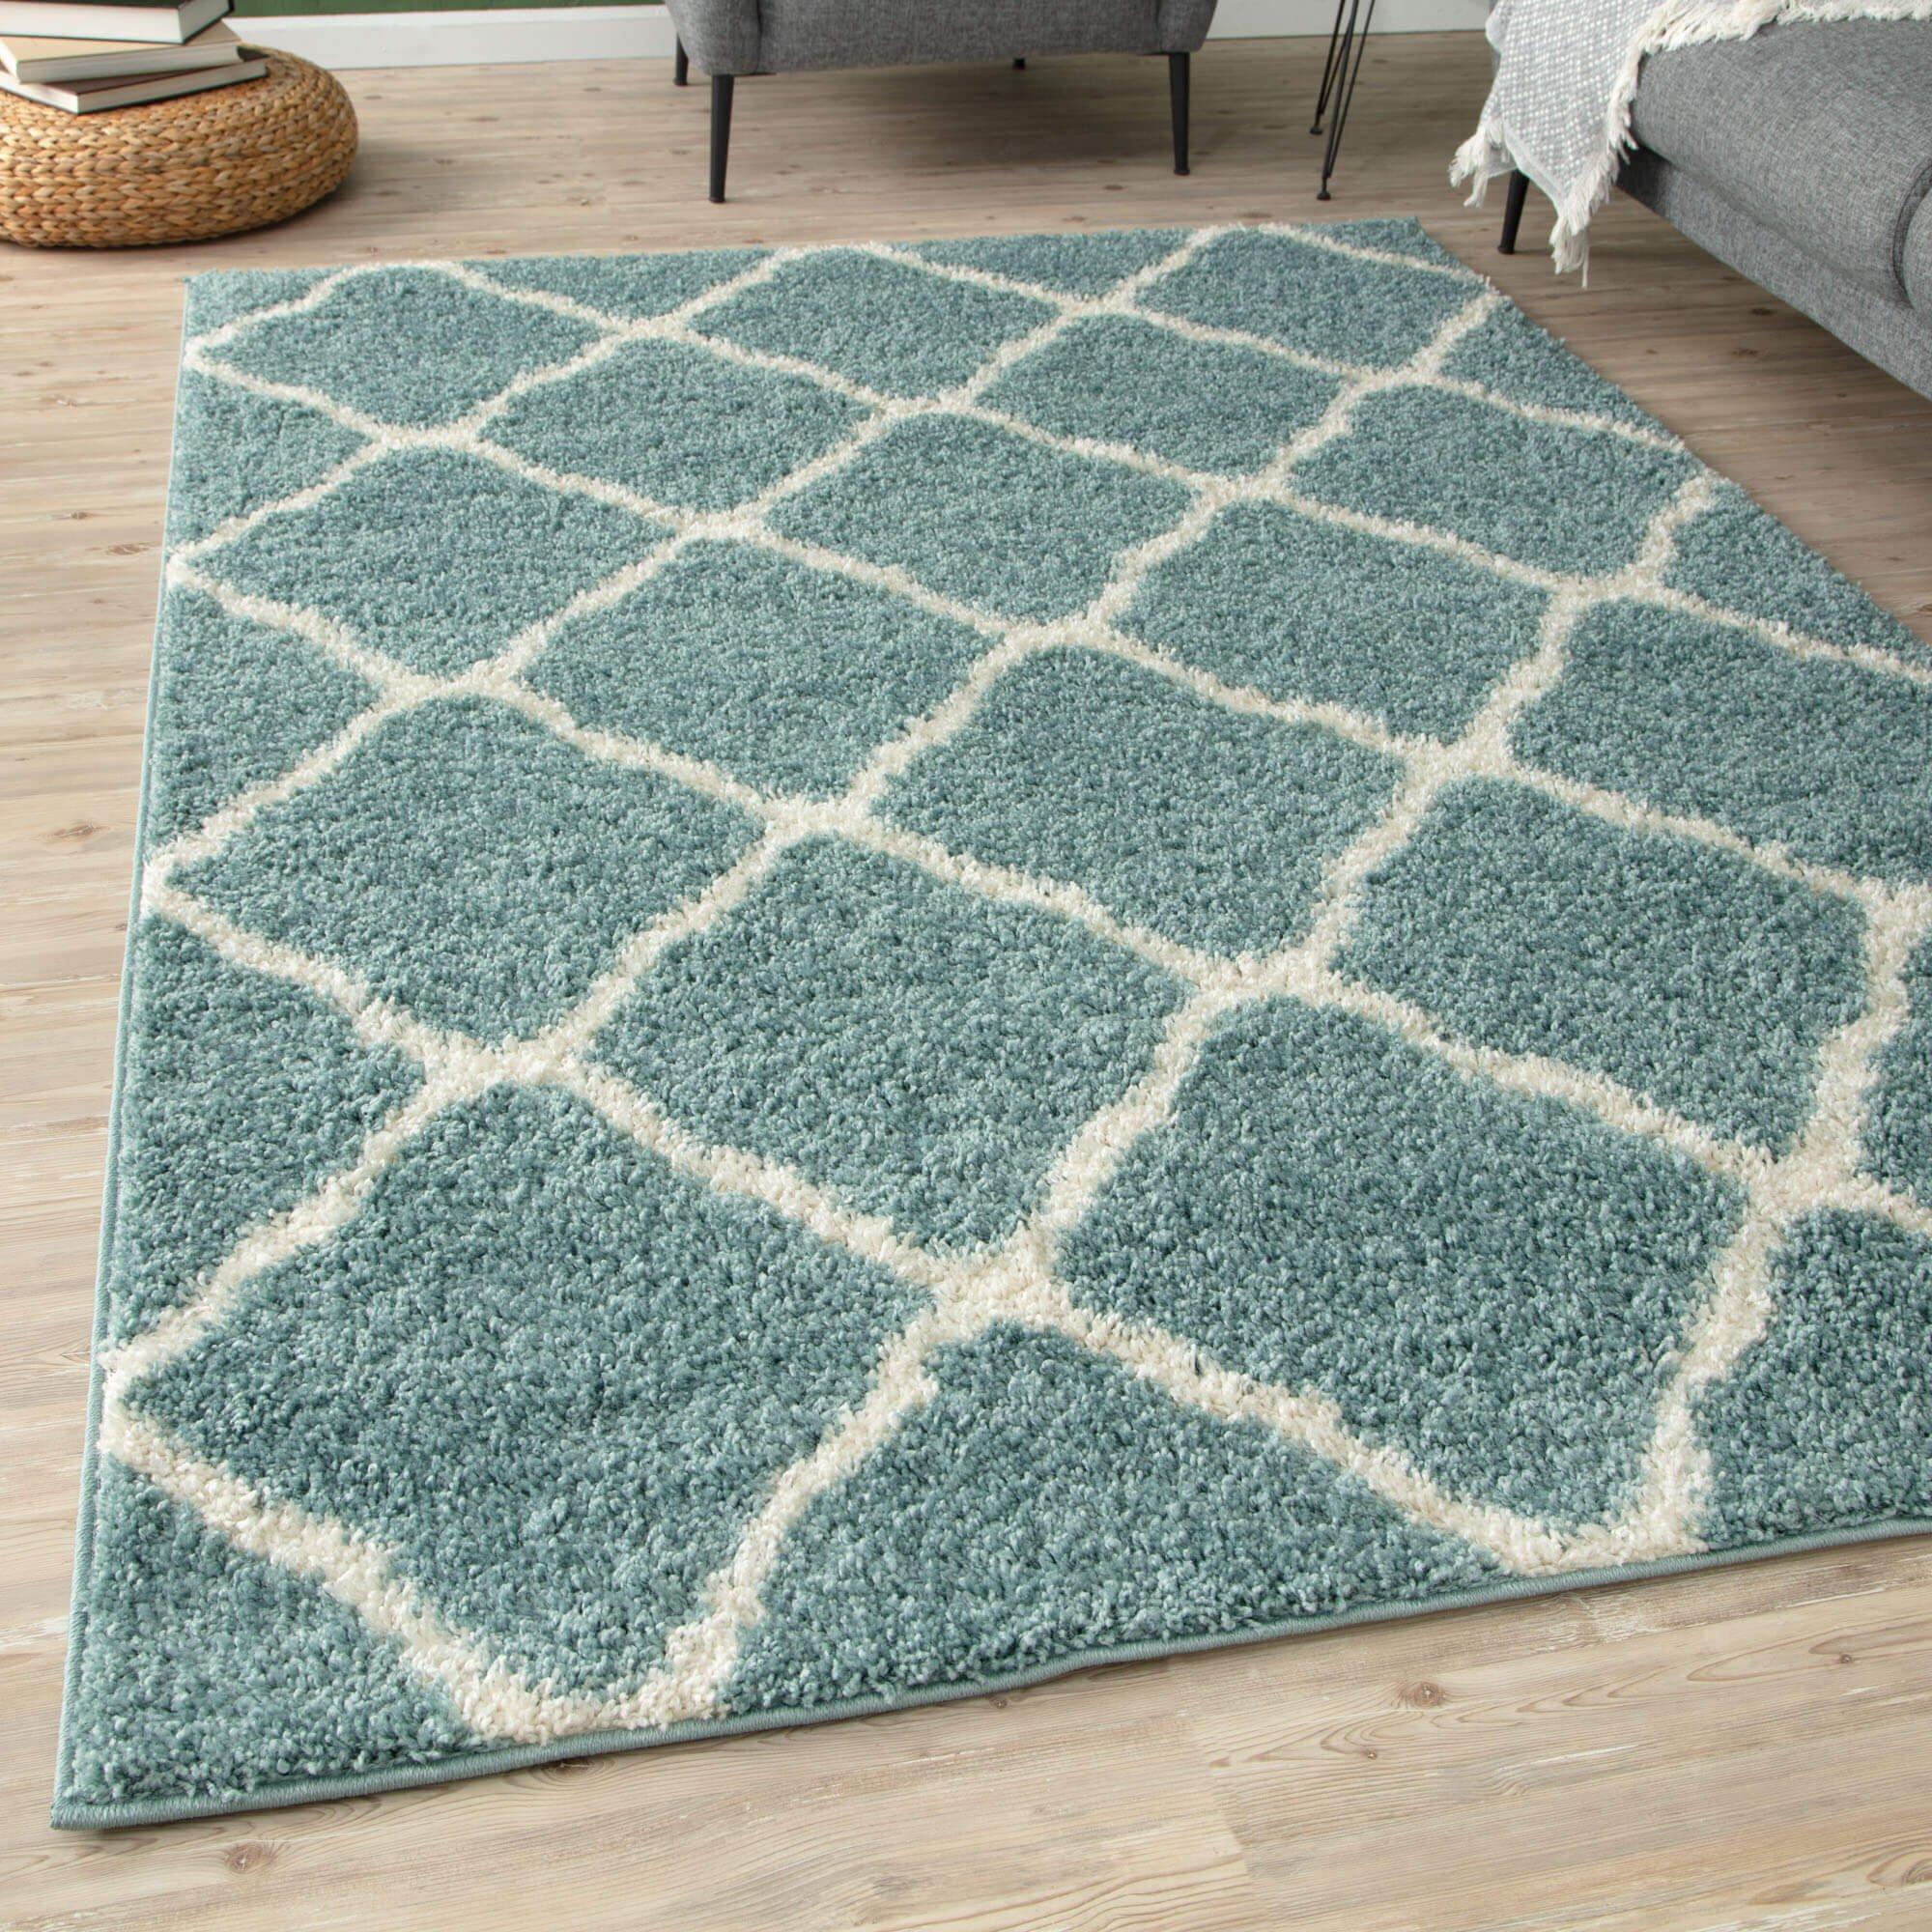 Myshaggy Collection Rugs Moroccan Design in Duck Egg Blue - 385DB